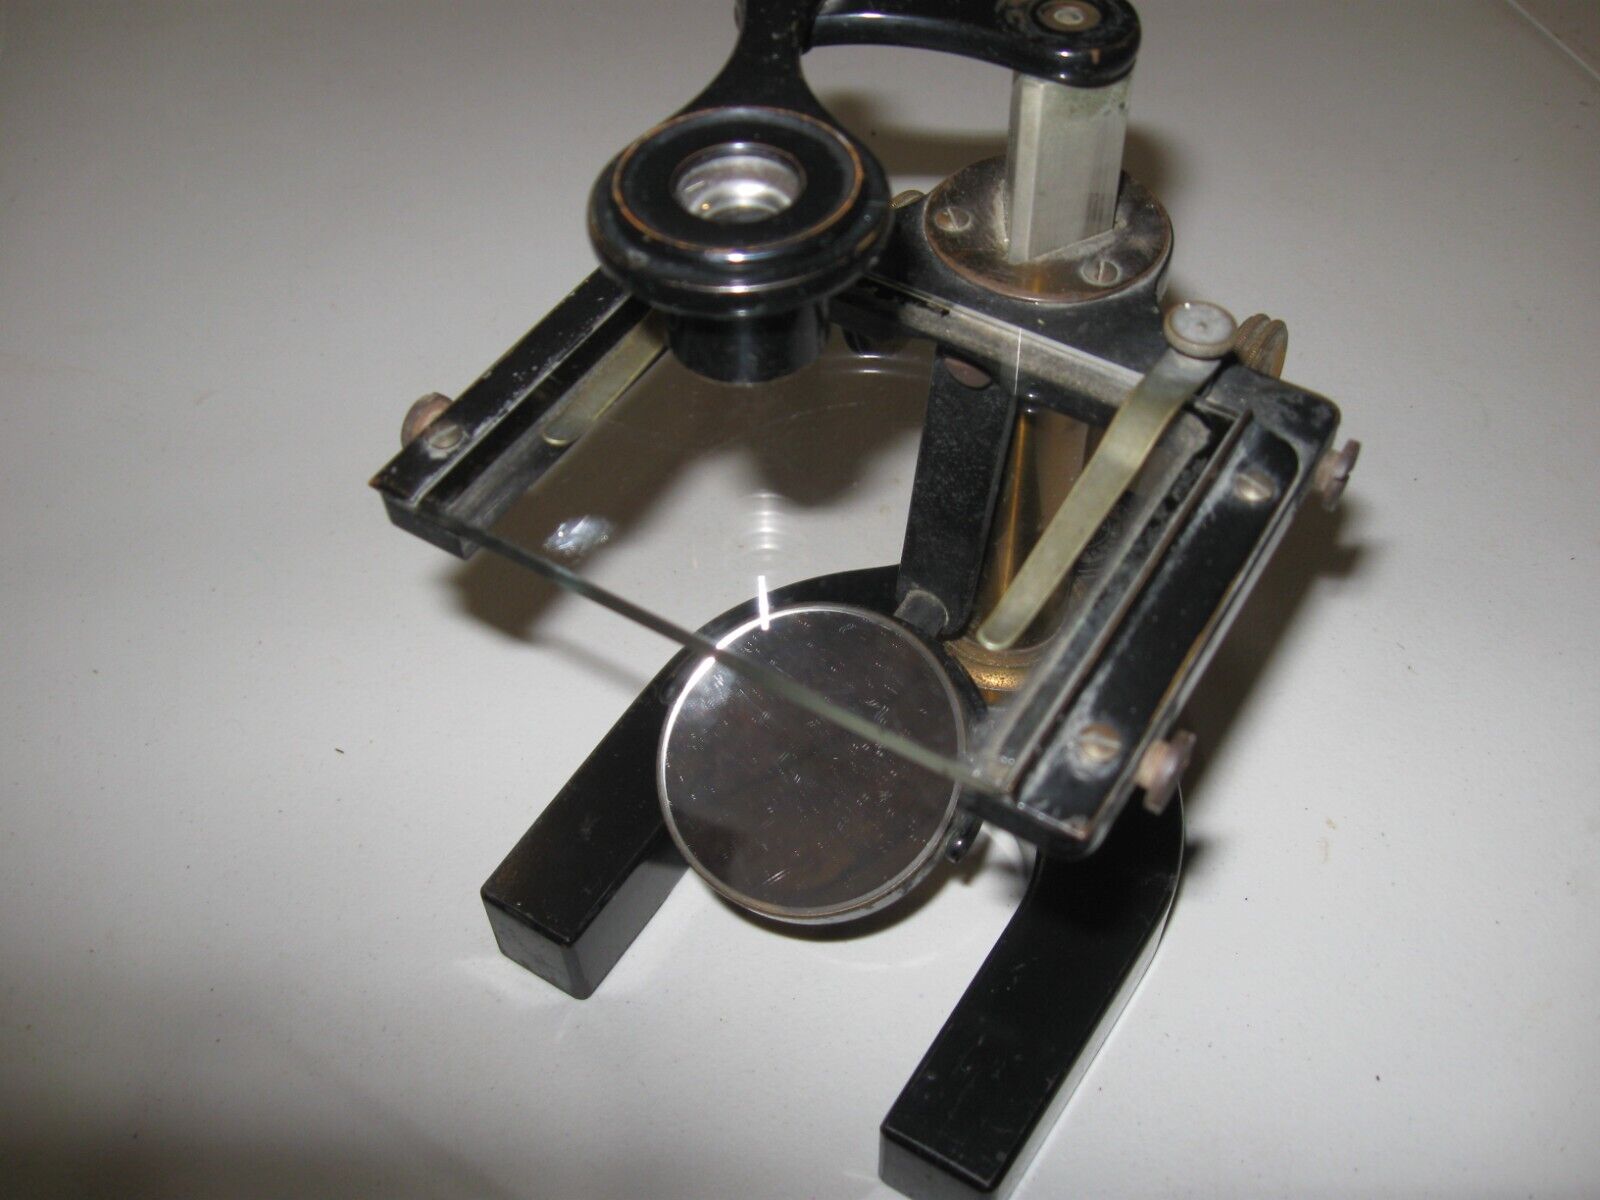 Antique Bausch & Lomb Optical Dissecting Botanical Microscope No 86922 with Lens